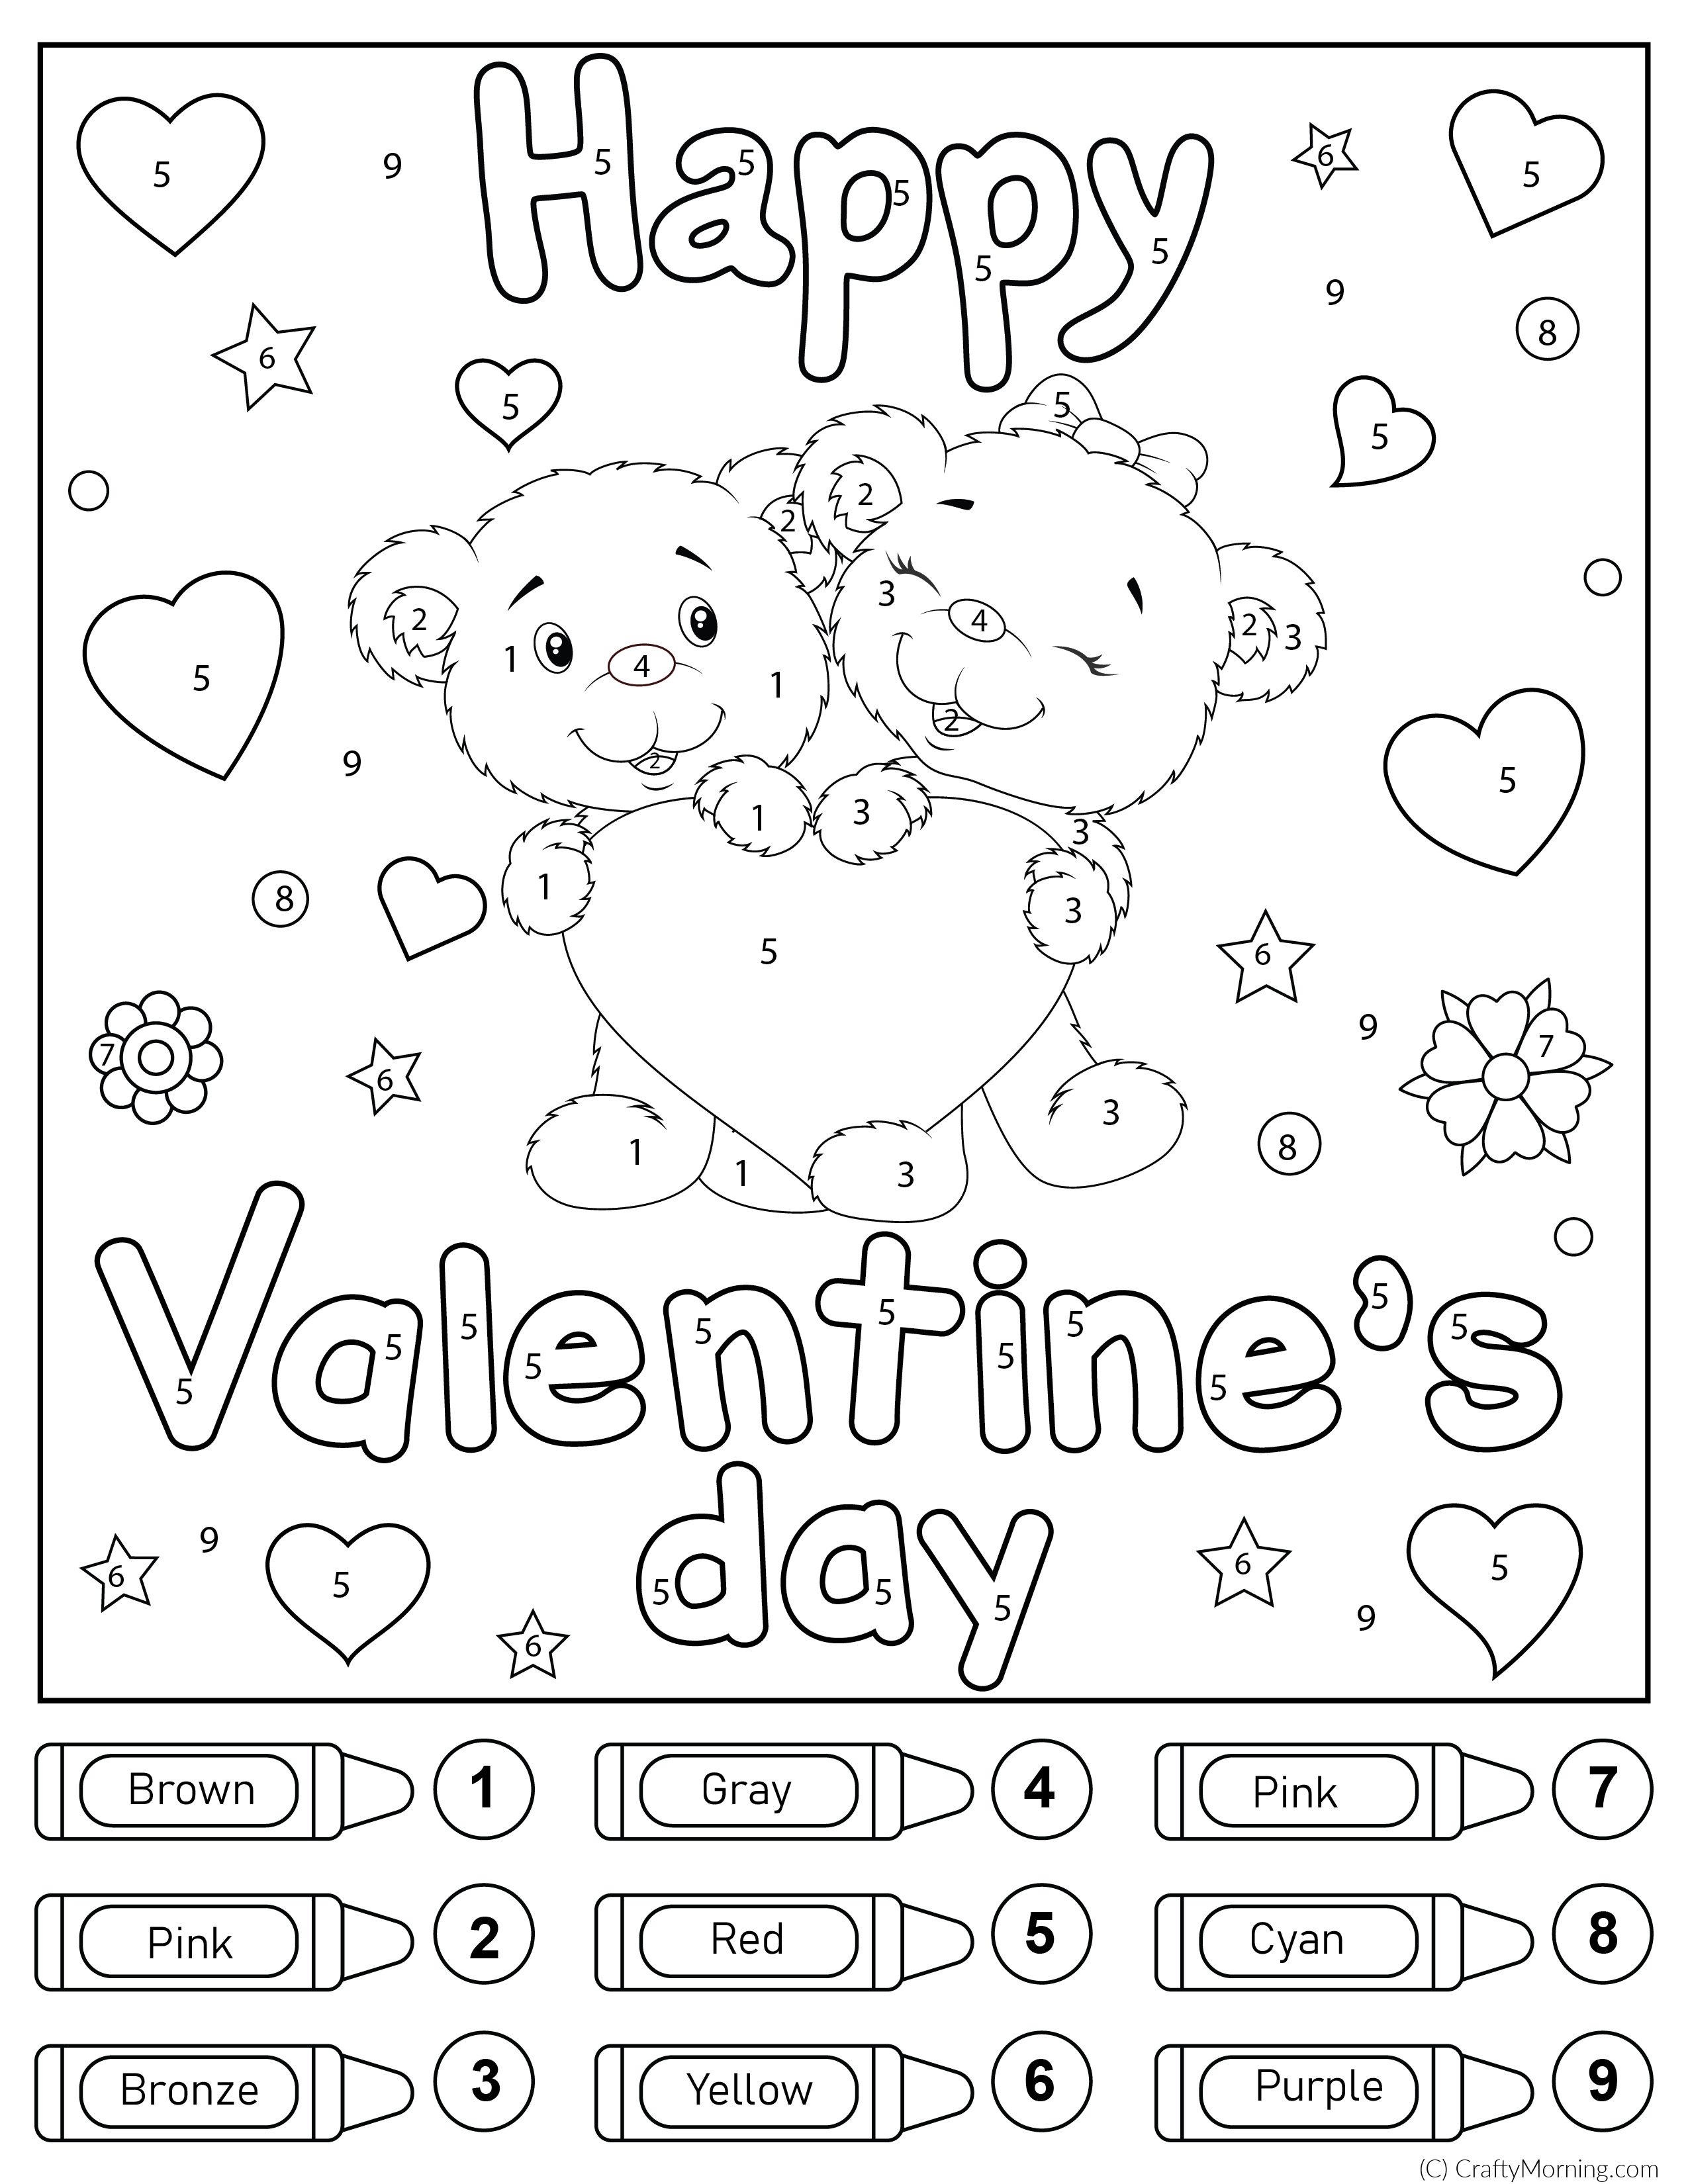 Valentines day color by number printable